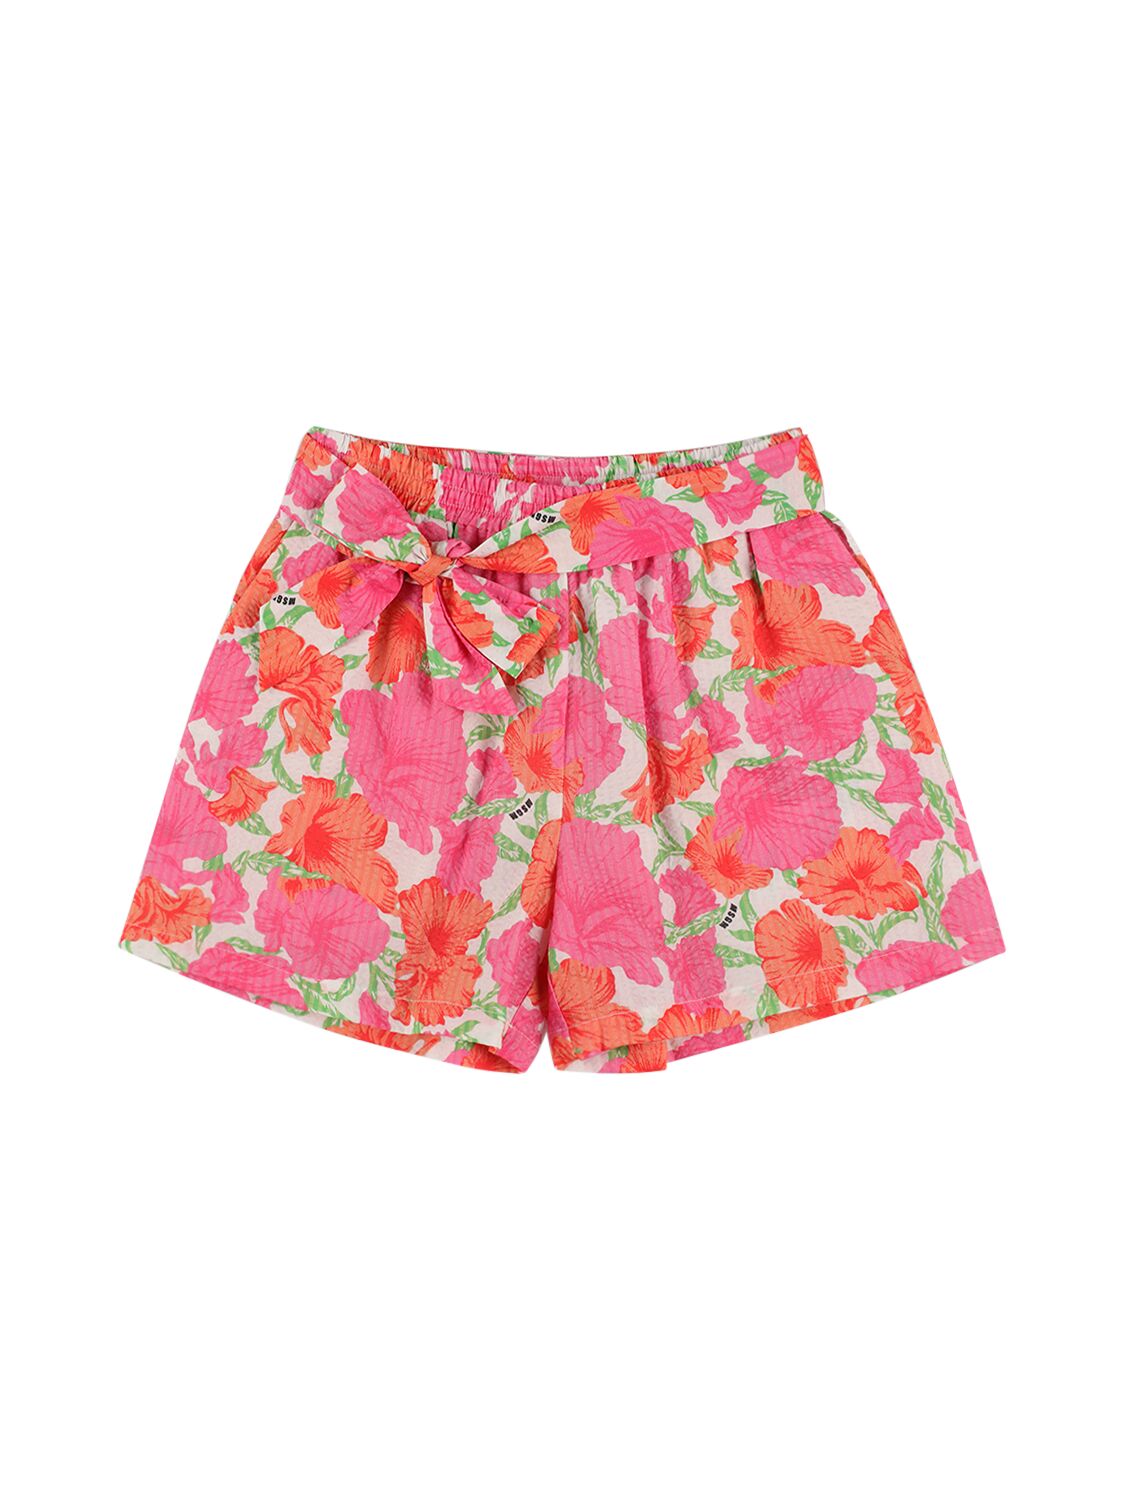 Image of Flower Printed Shorts